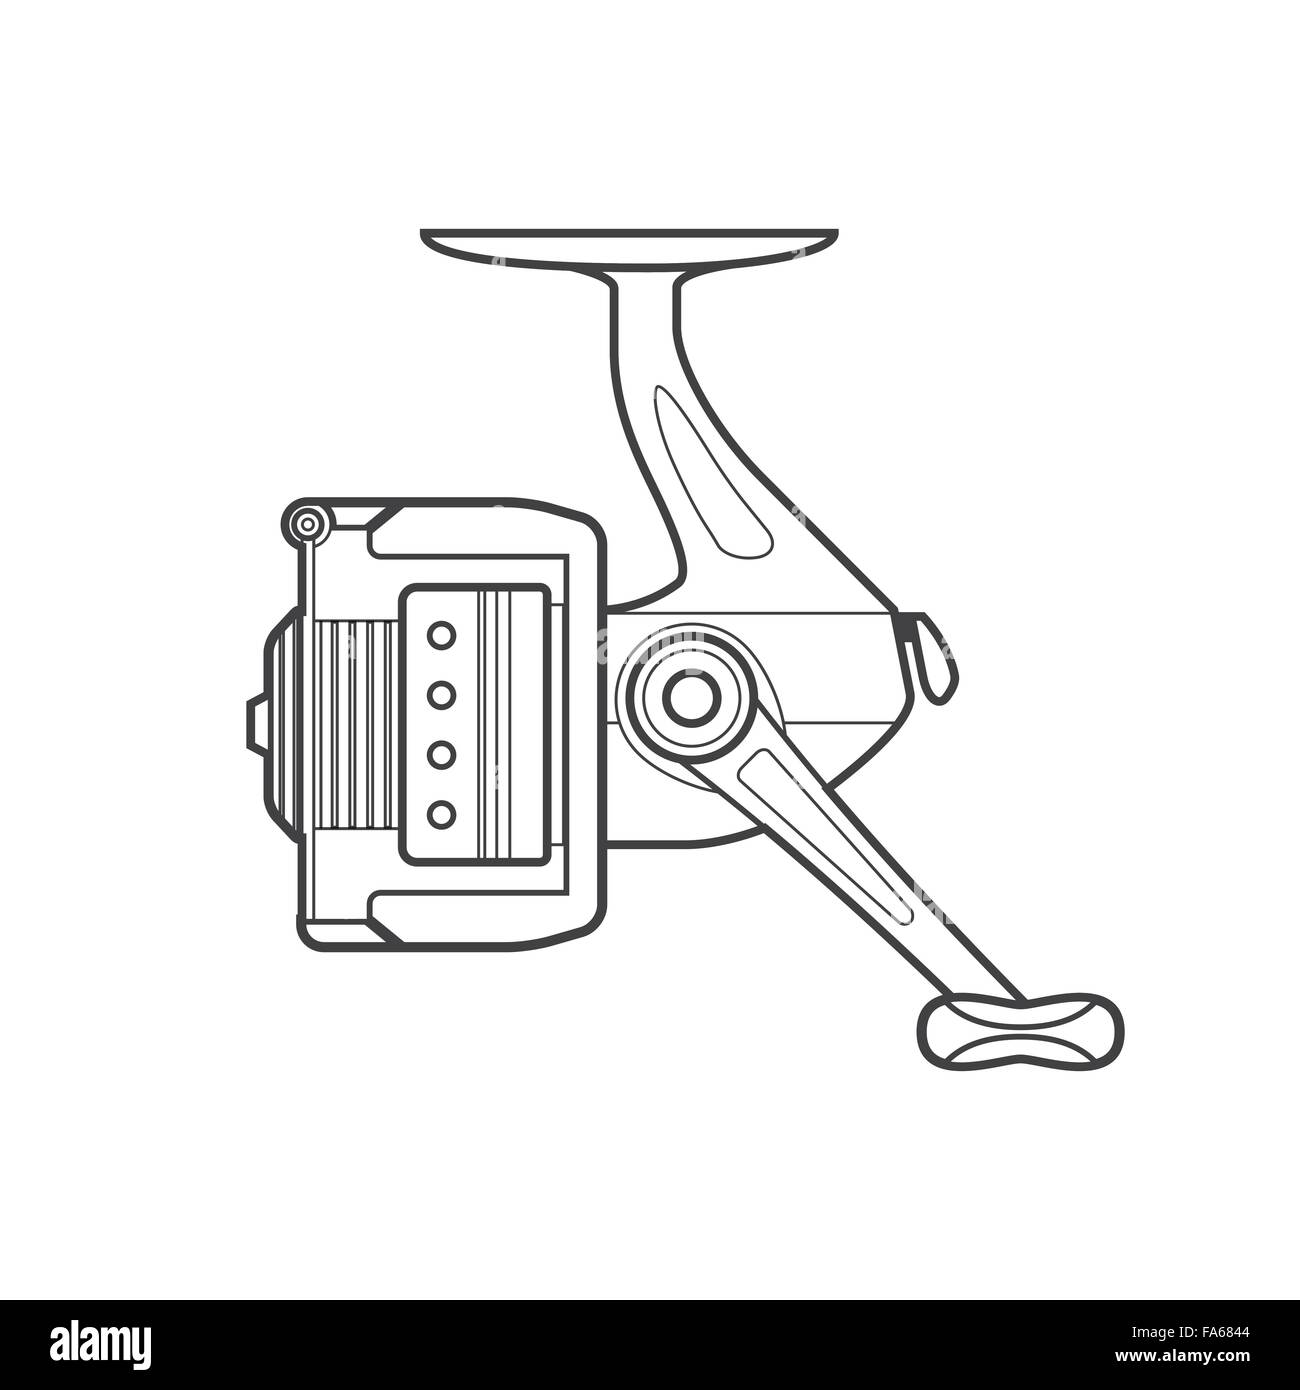 vector monochrome contour spinning fishing fixed spool reel isolated black outline illustration on white background Stock Vector